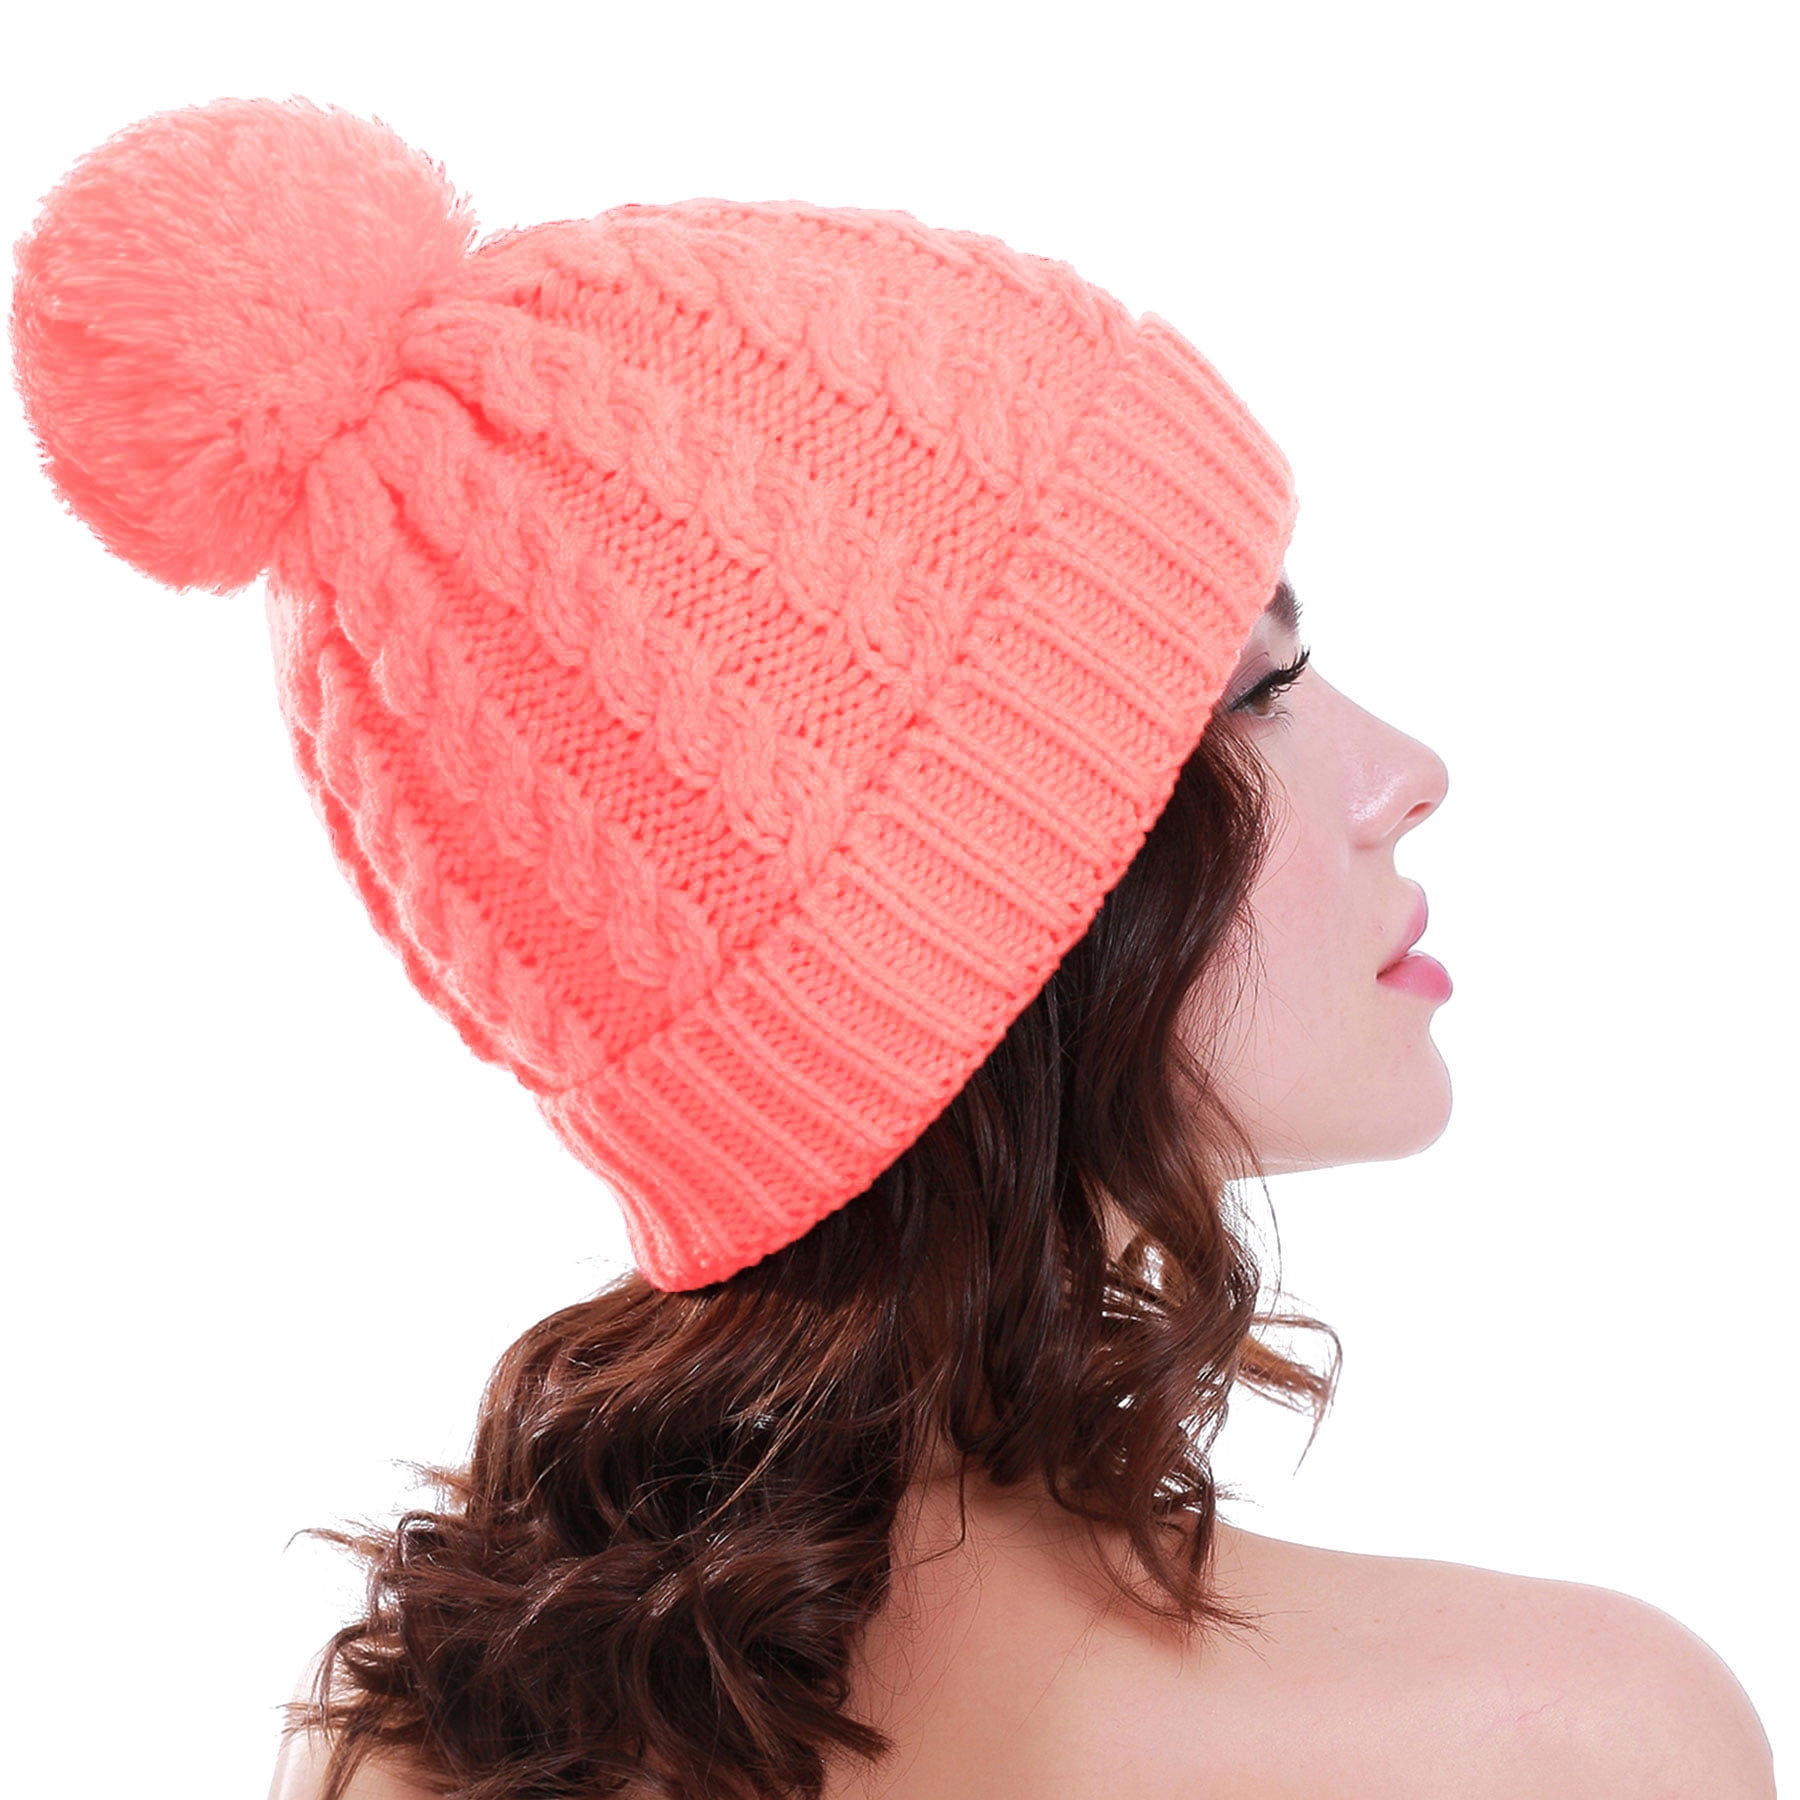 Ropane hat and cap discount 65% Pink Single WOMEN FASHION Accessories Hat and cap Pink 